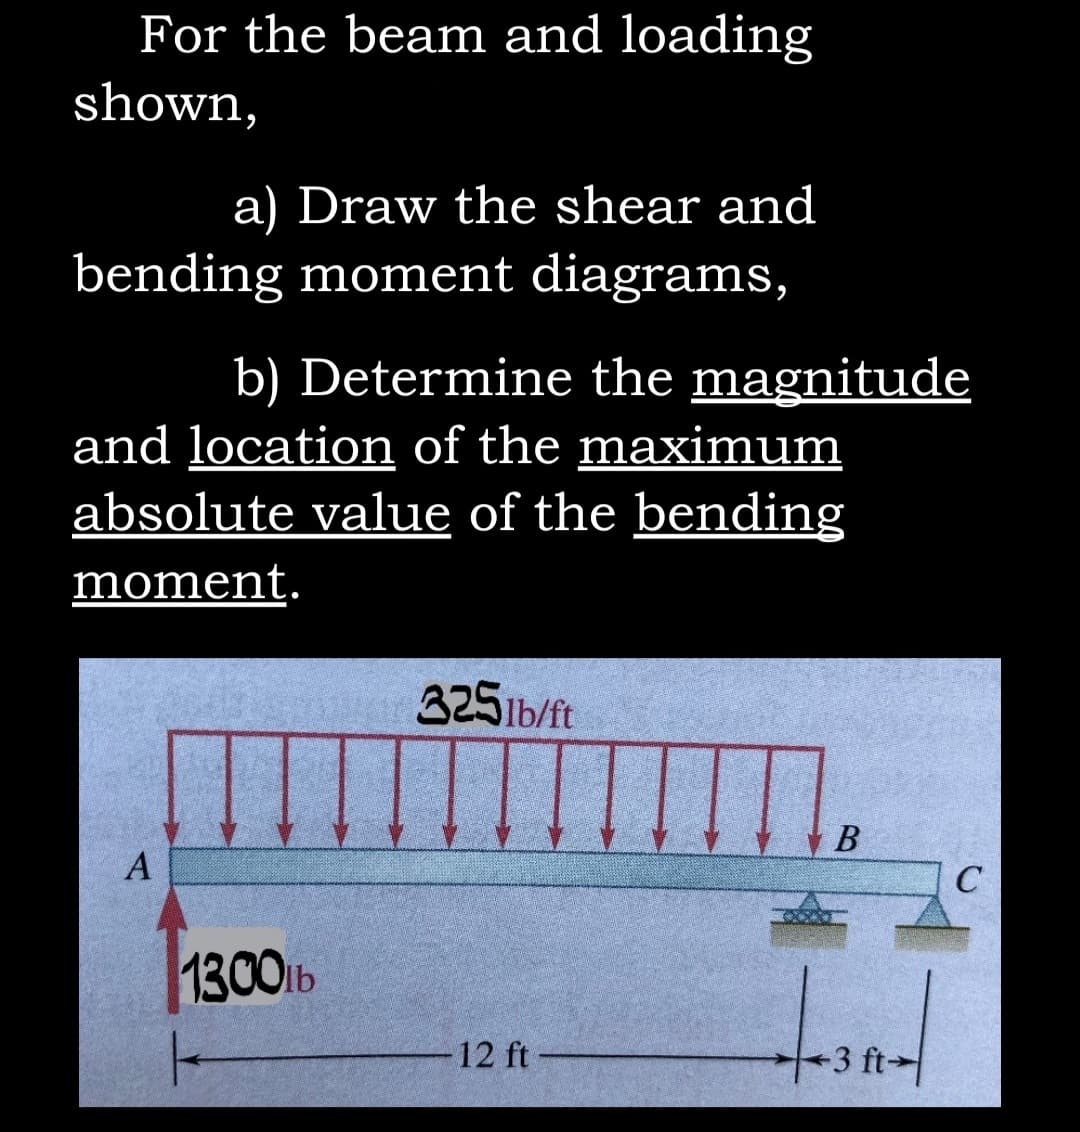 For the beam and loading
shown,
a) Draw the shear and
bending moment diagrams,
b) Determine the magnitude
and location of the maximum
absolute value of the bending
moment.
3251b/ft
1300tb
-12 ft
-3 ft-
